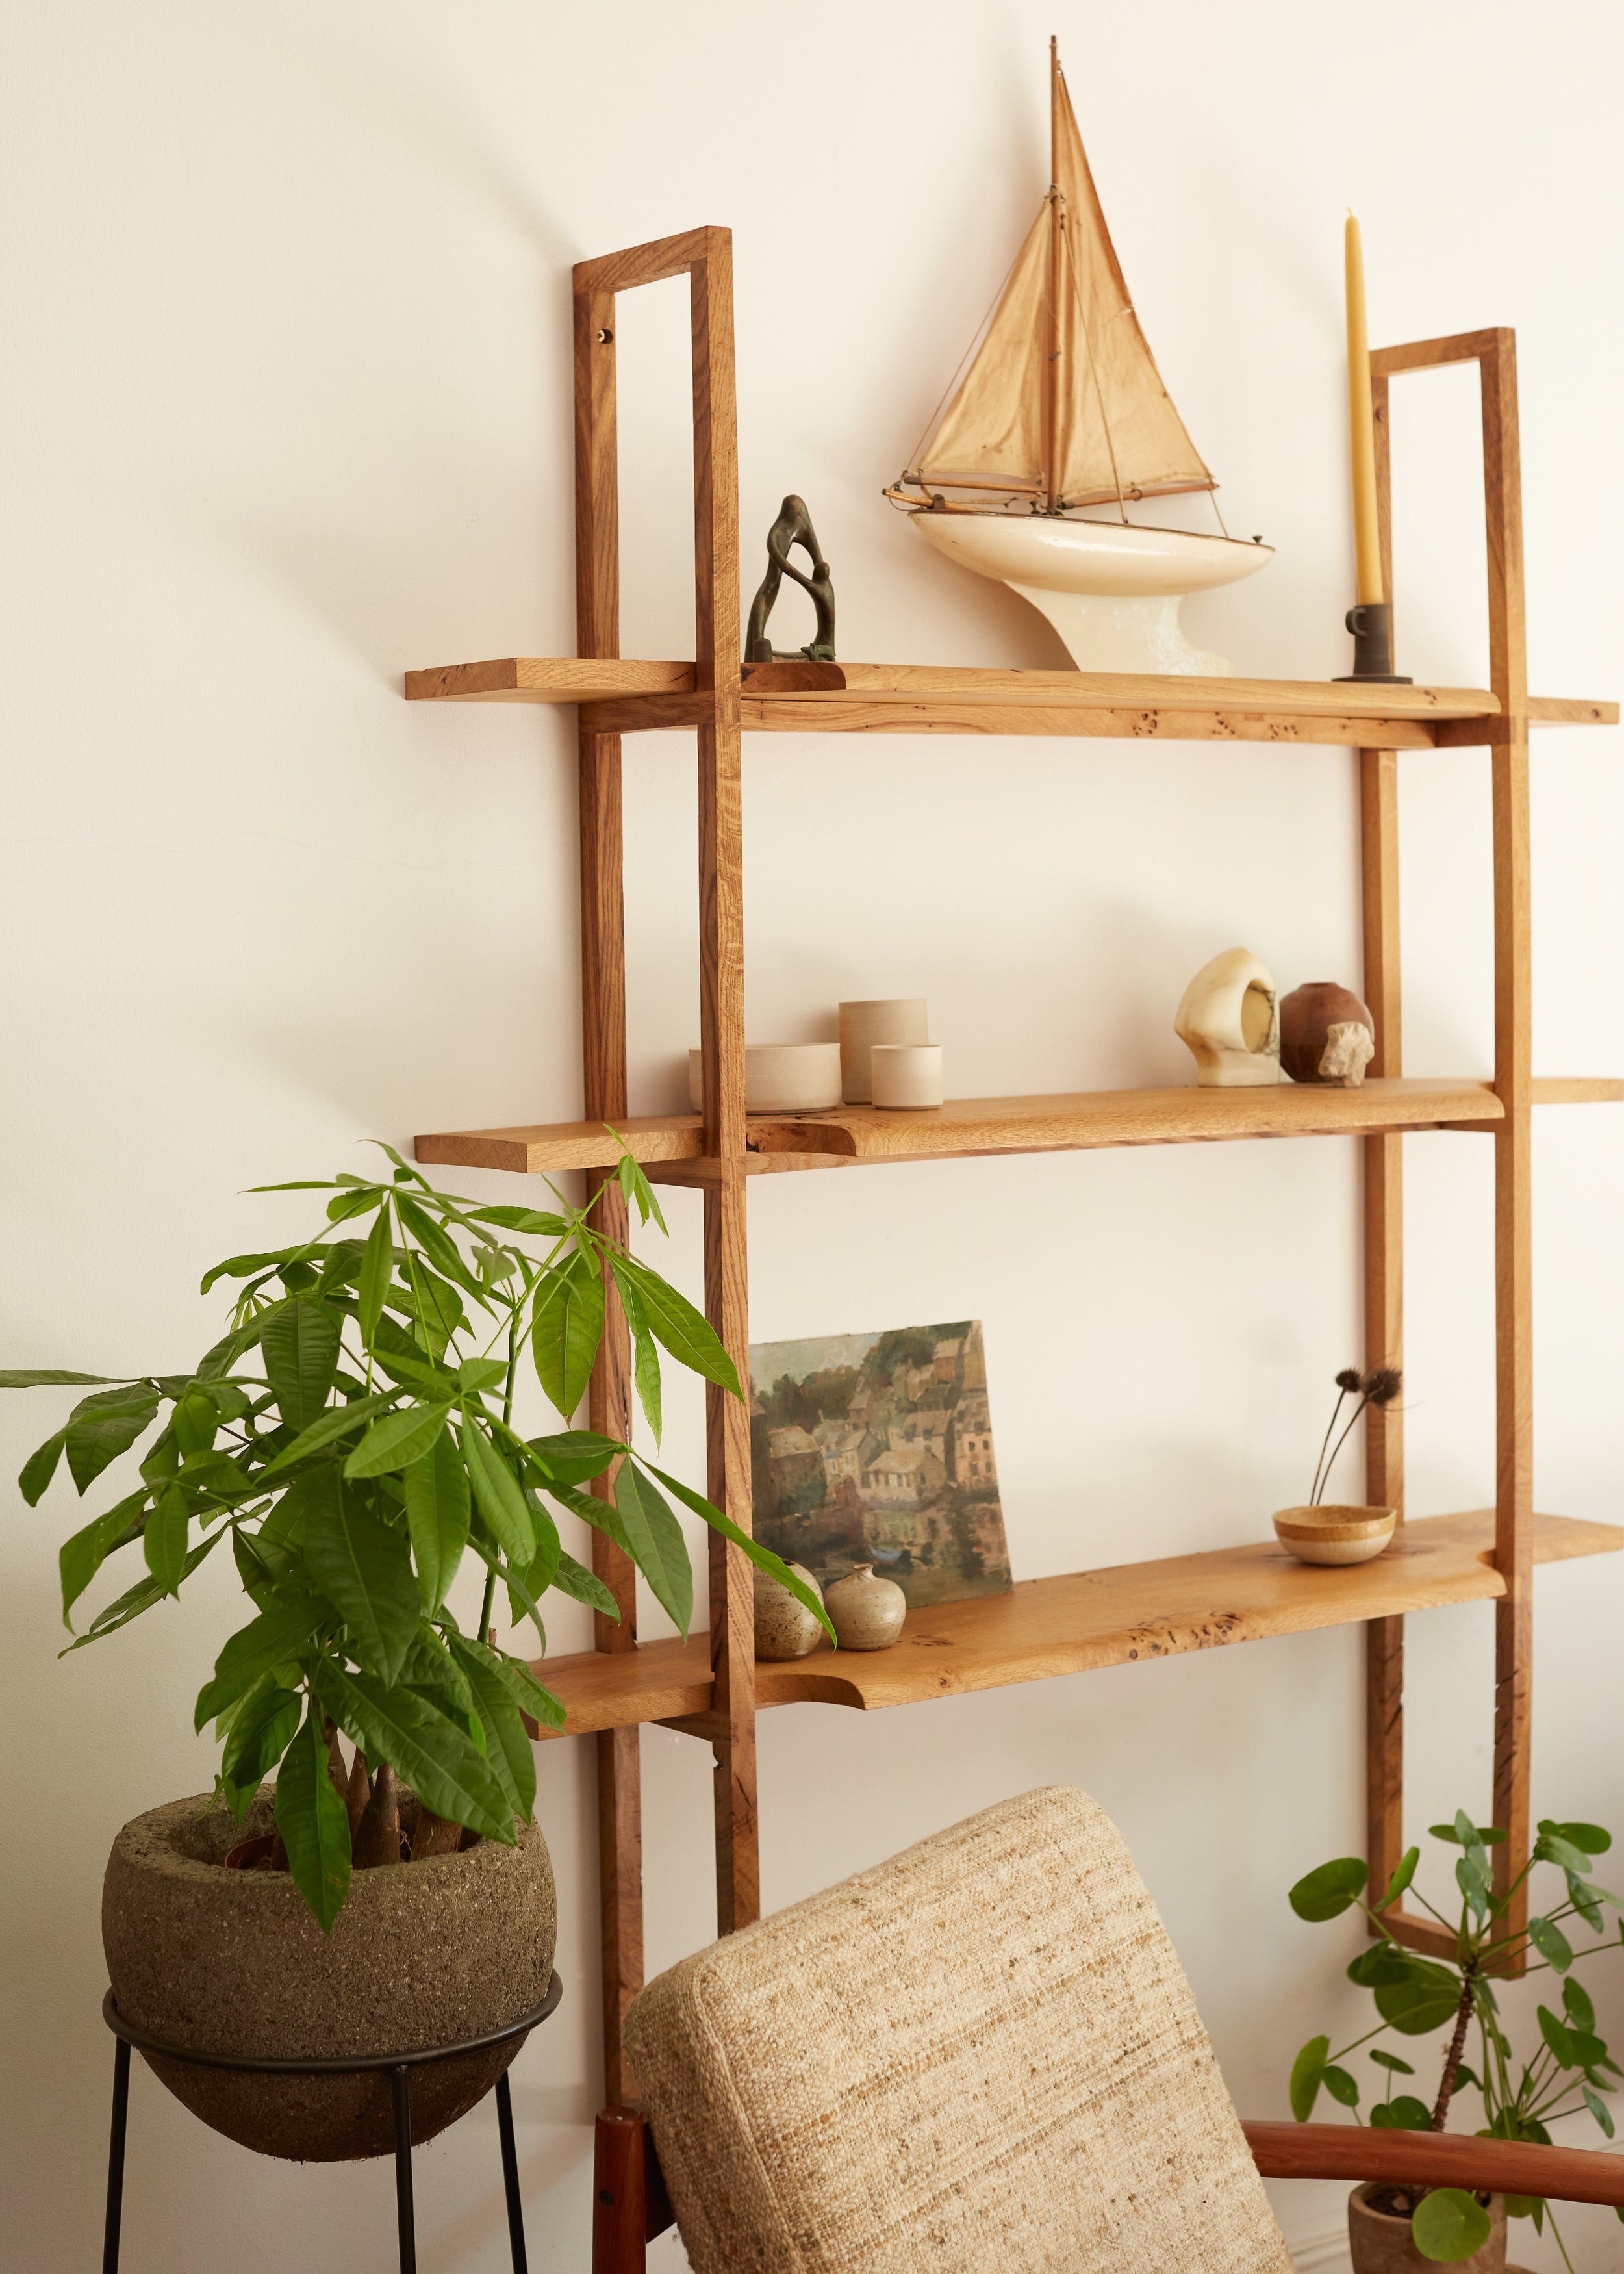 Modern wooden shelving with vintage and handmade objects